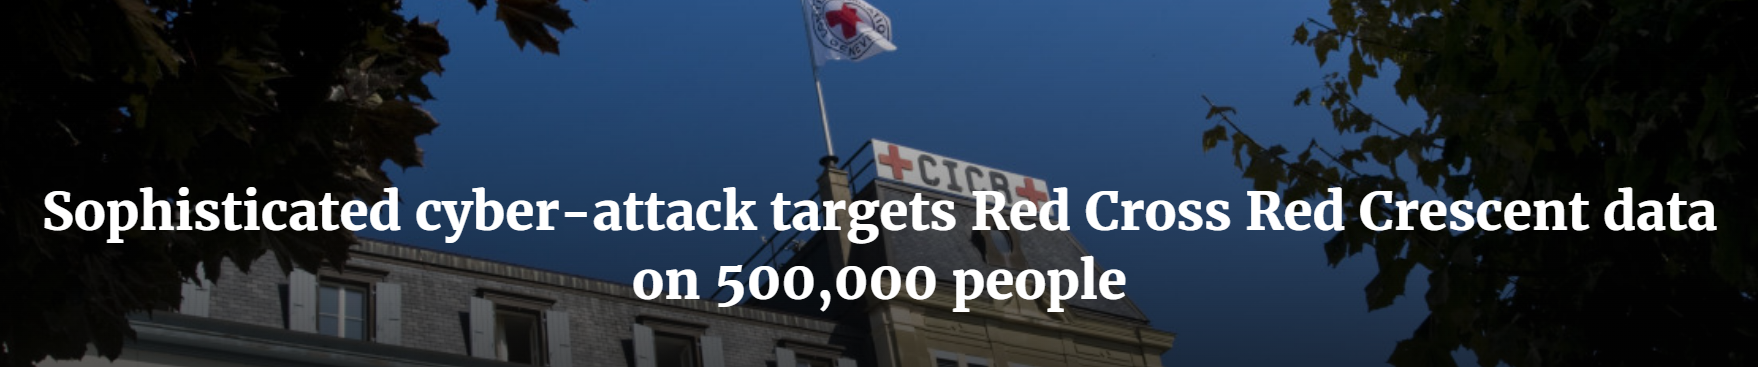 Red Cross hit by a sophisticated cyberattack